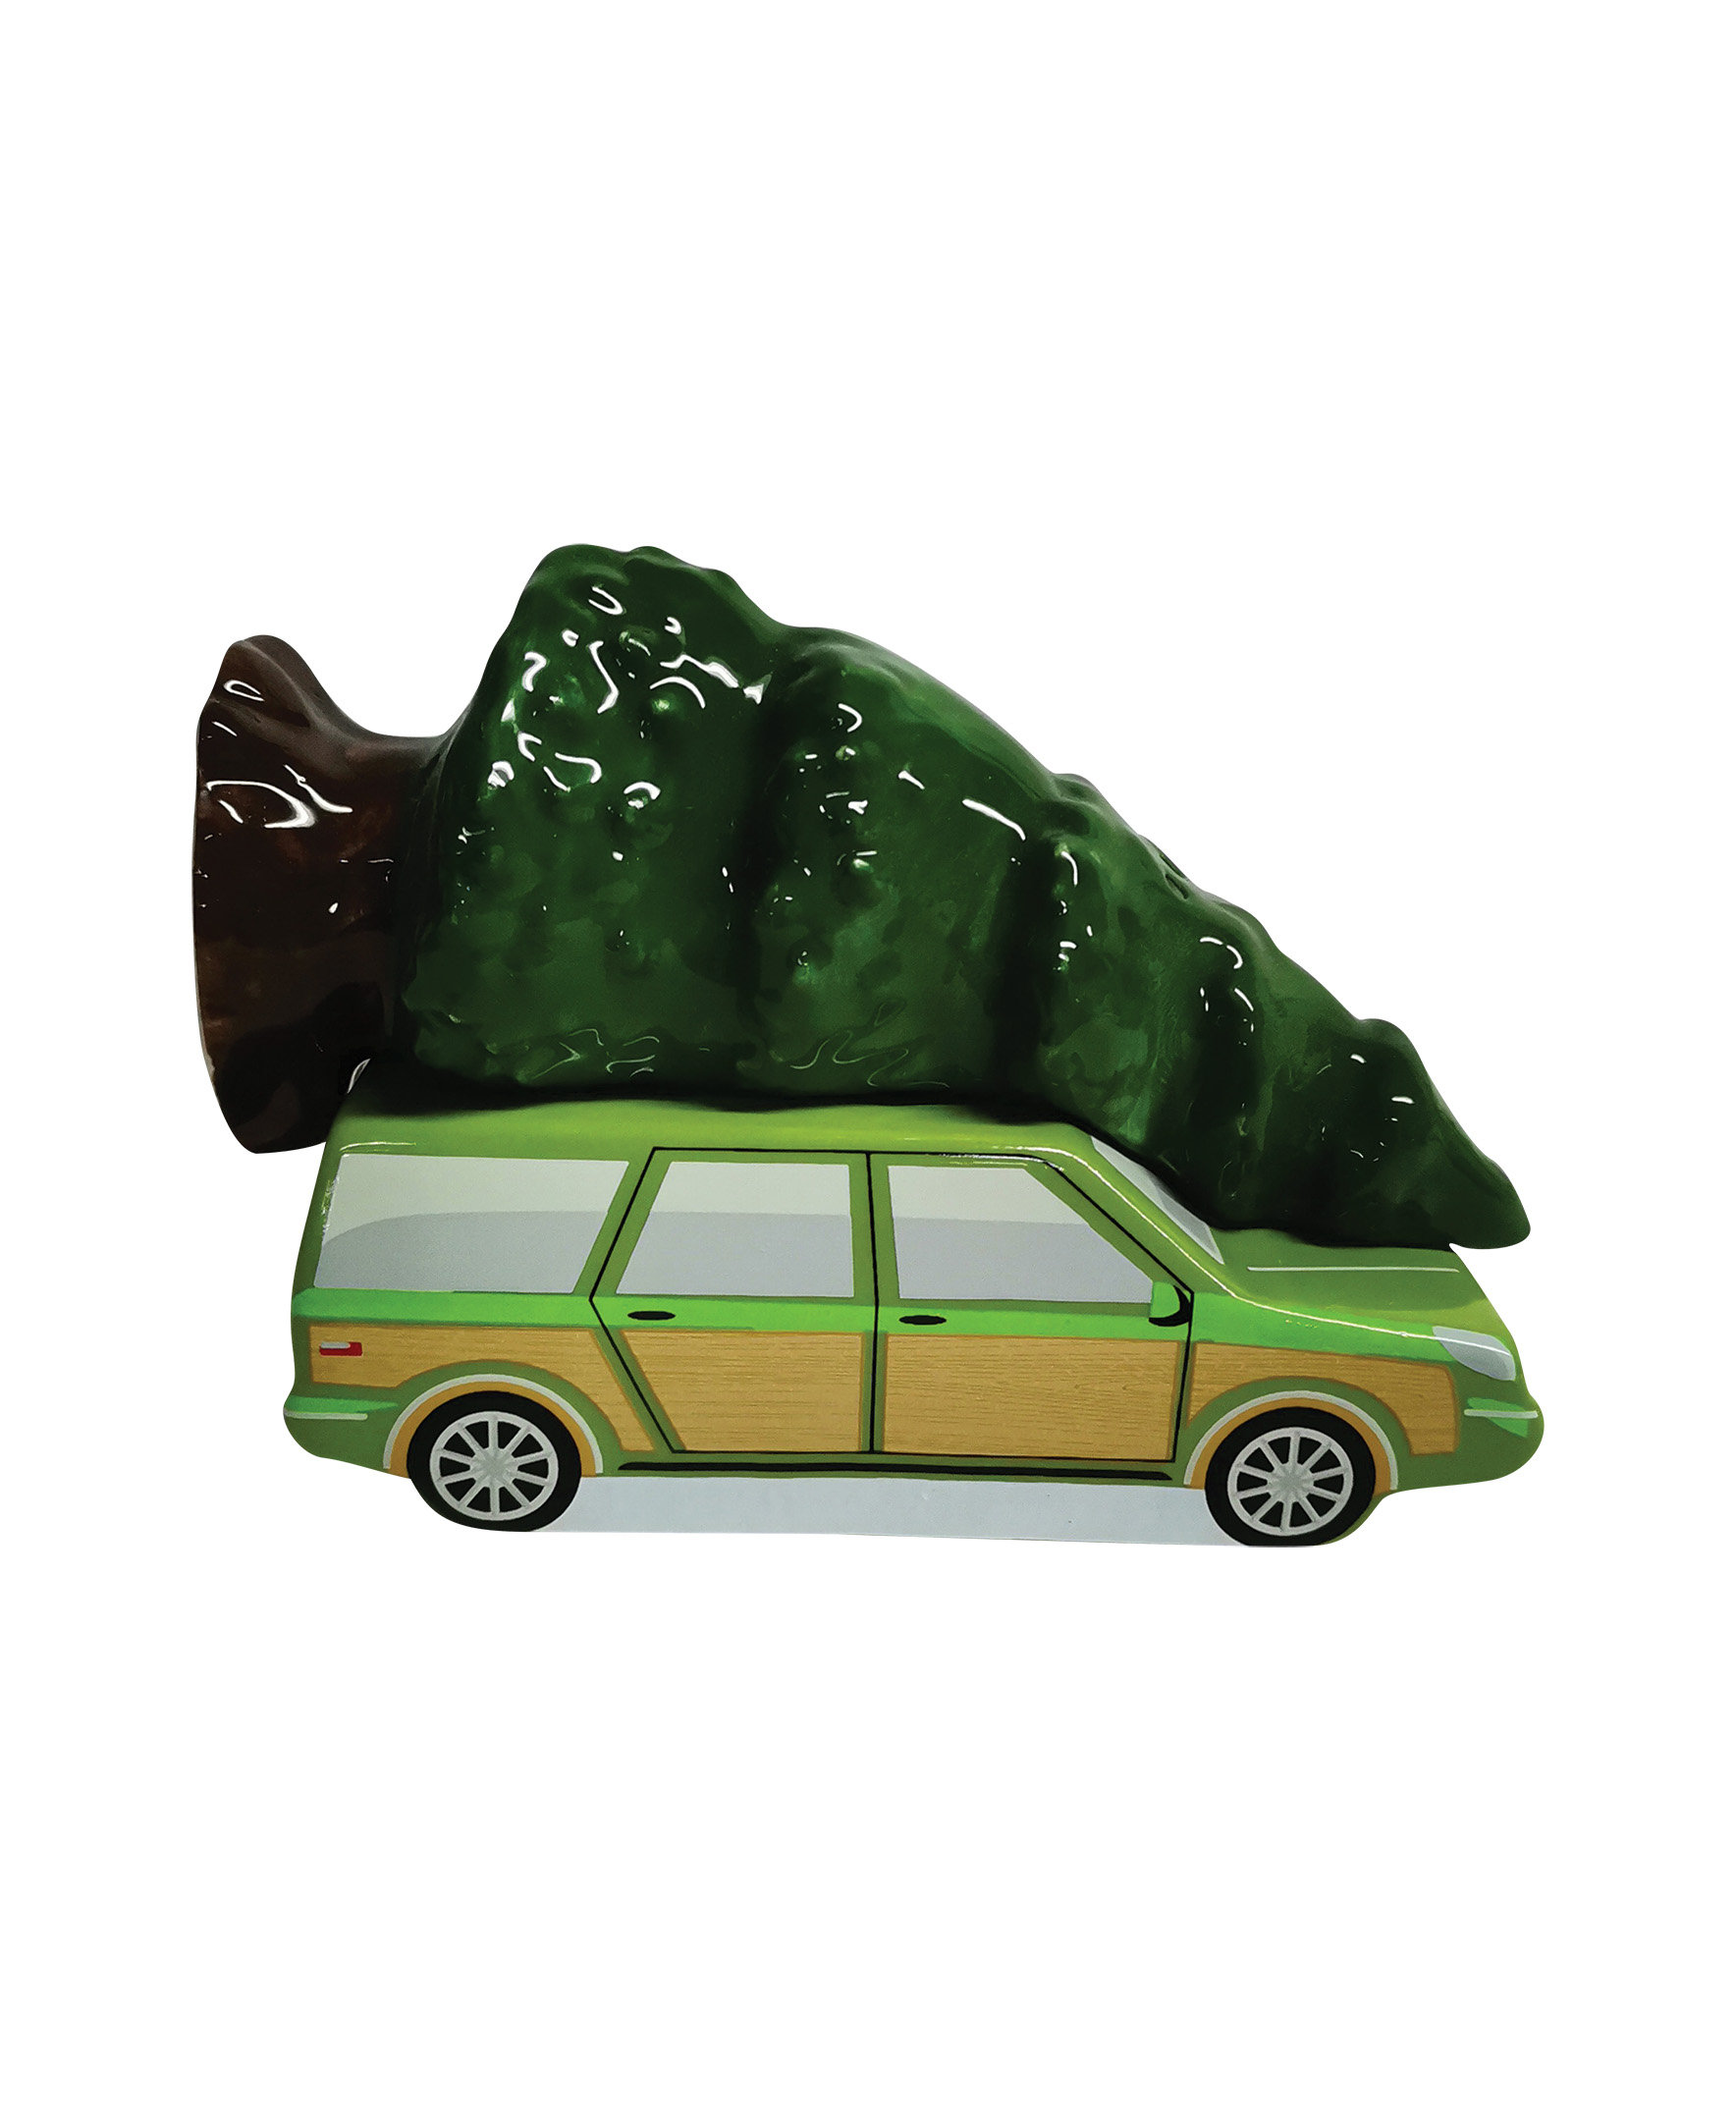 Department 56 Christmas Vacation Griswold Family Car And Tree Salt And  Pepper Shaker Set & Reviews